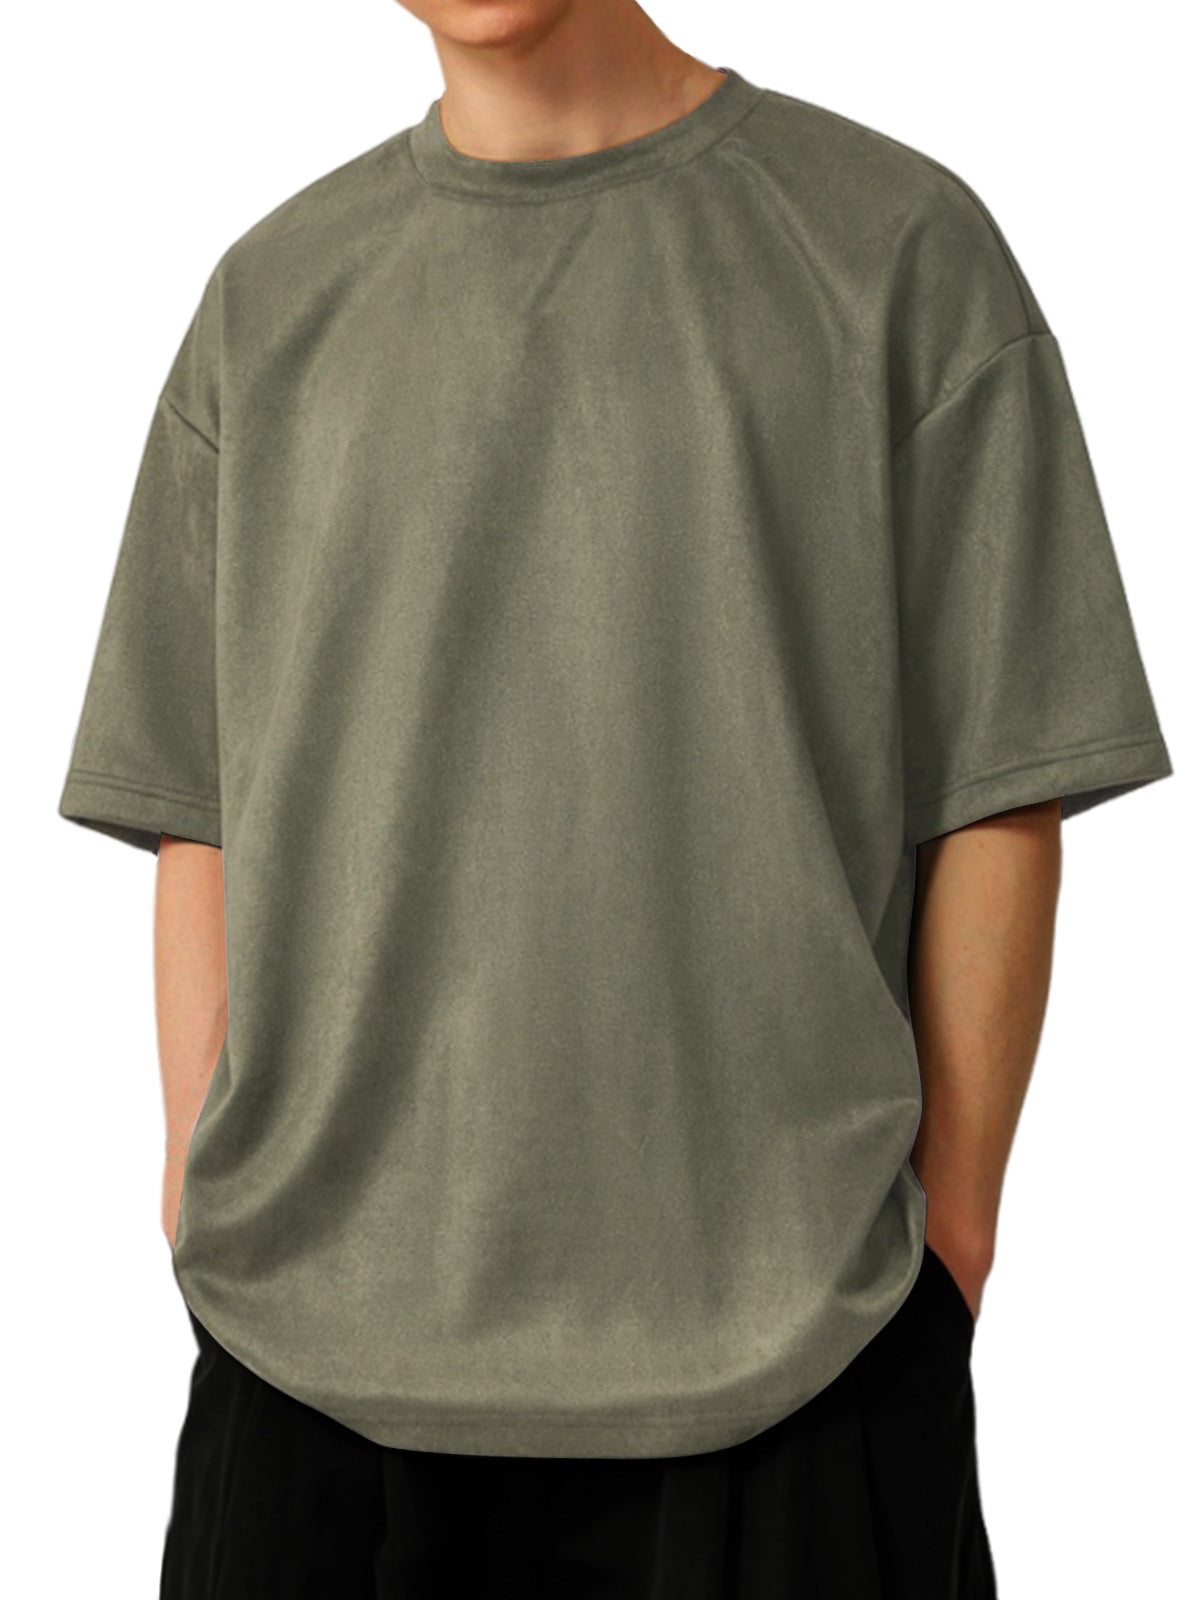 Men's Solid Color Round Neck Suede Short Sleeve T-Shirt